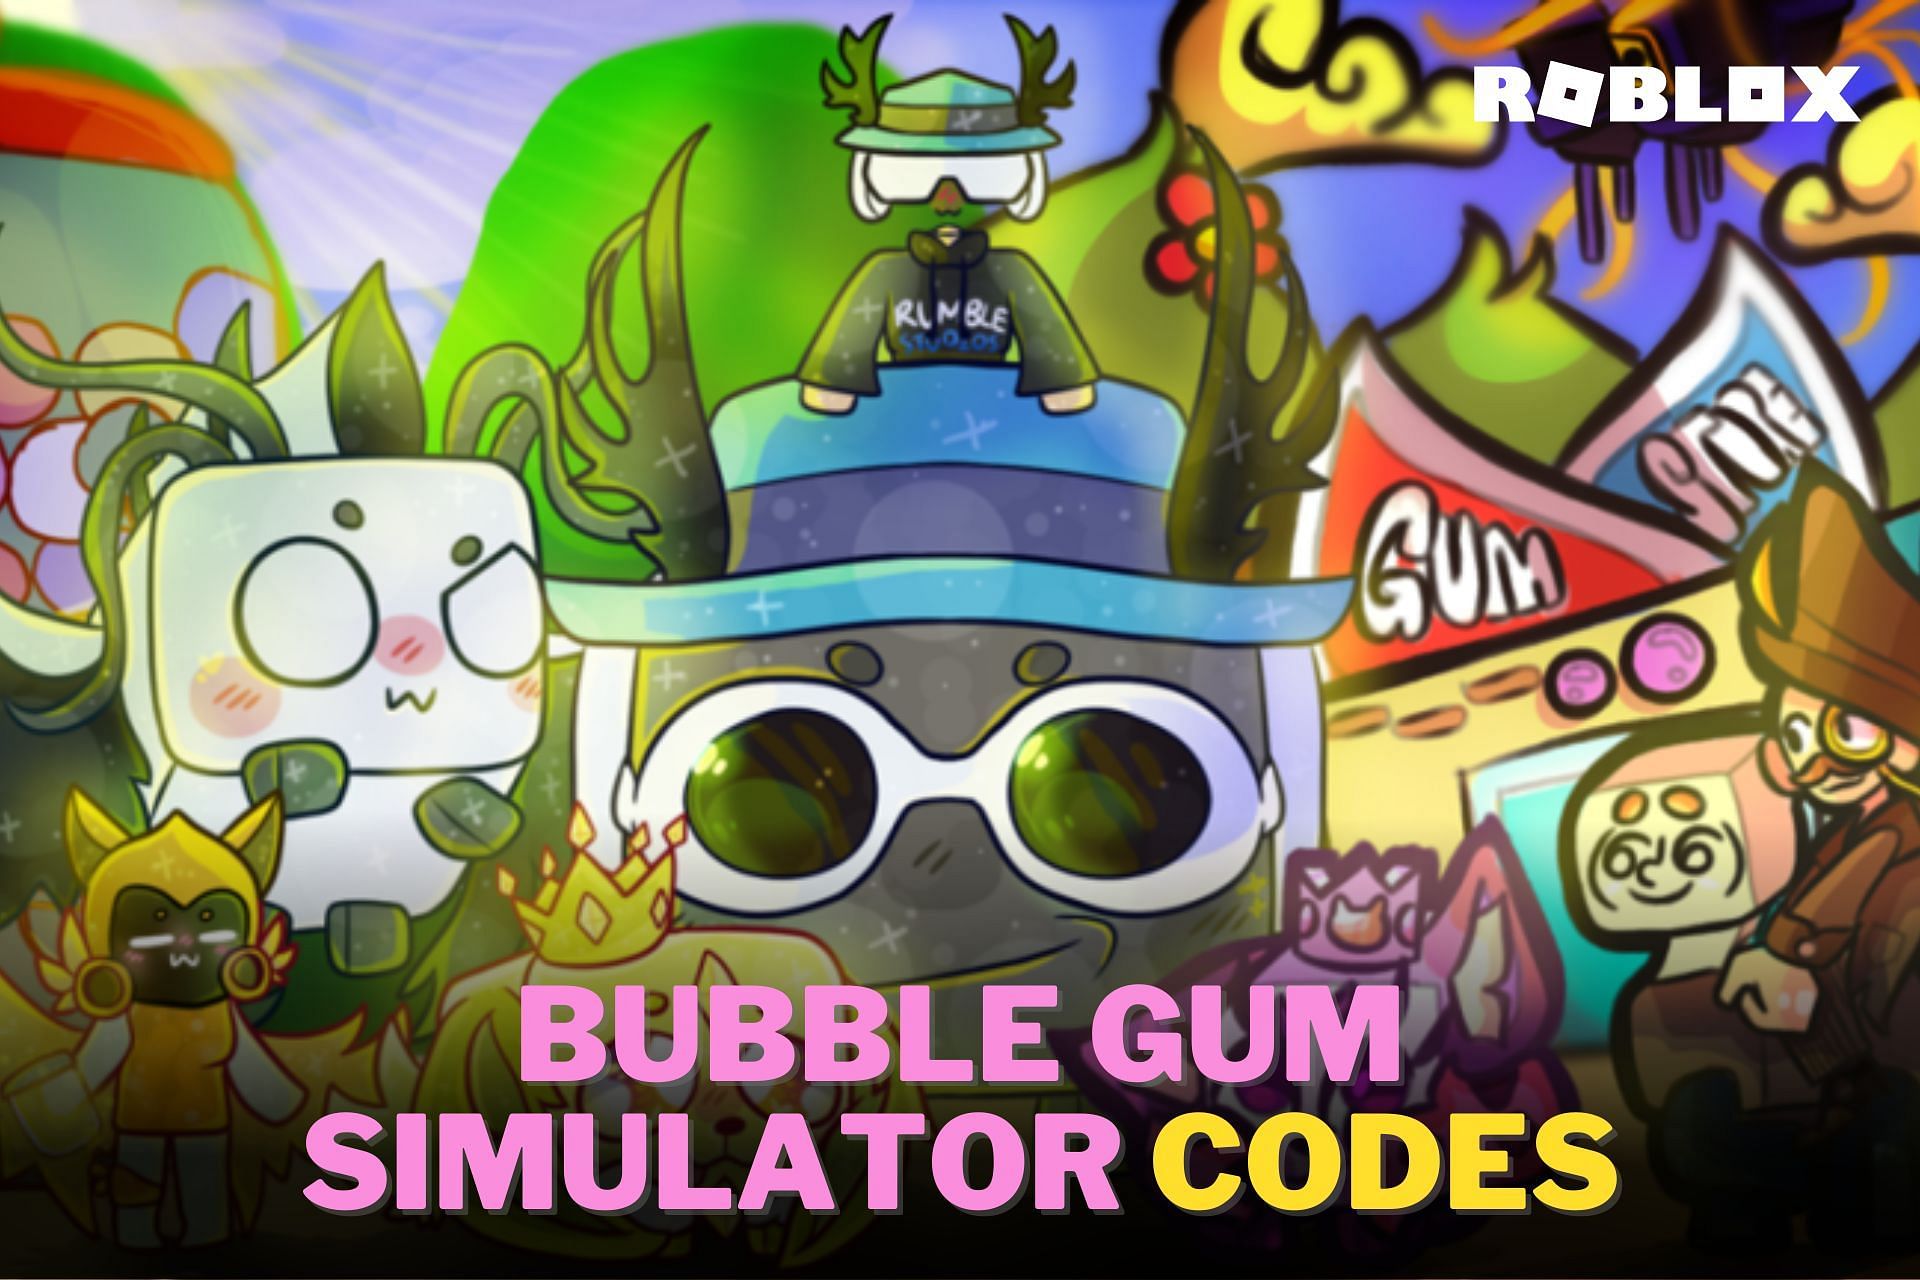 This Is The NEW BUBBLEGUM SIMULATOR or is it? 